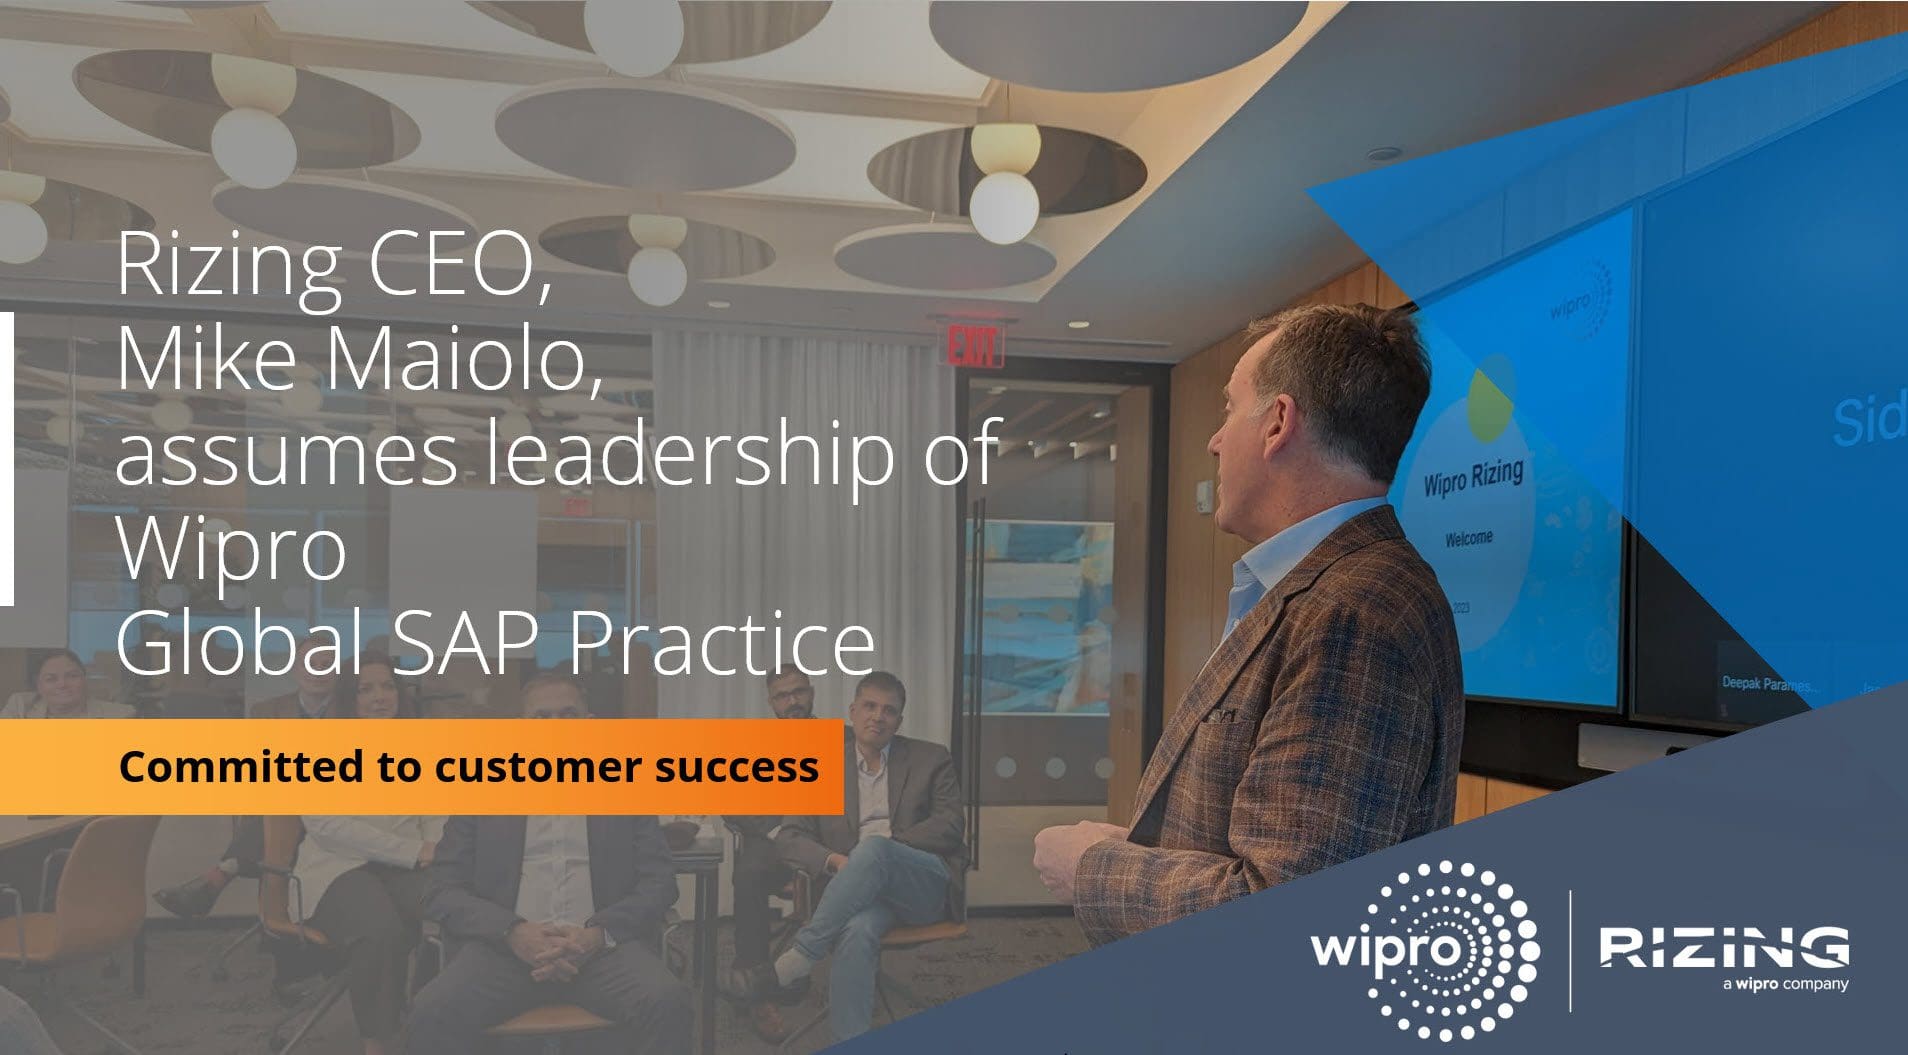 Mike Maiolo, CEO Rizing, appointed Head of Global SAP Practice at Wipro